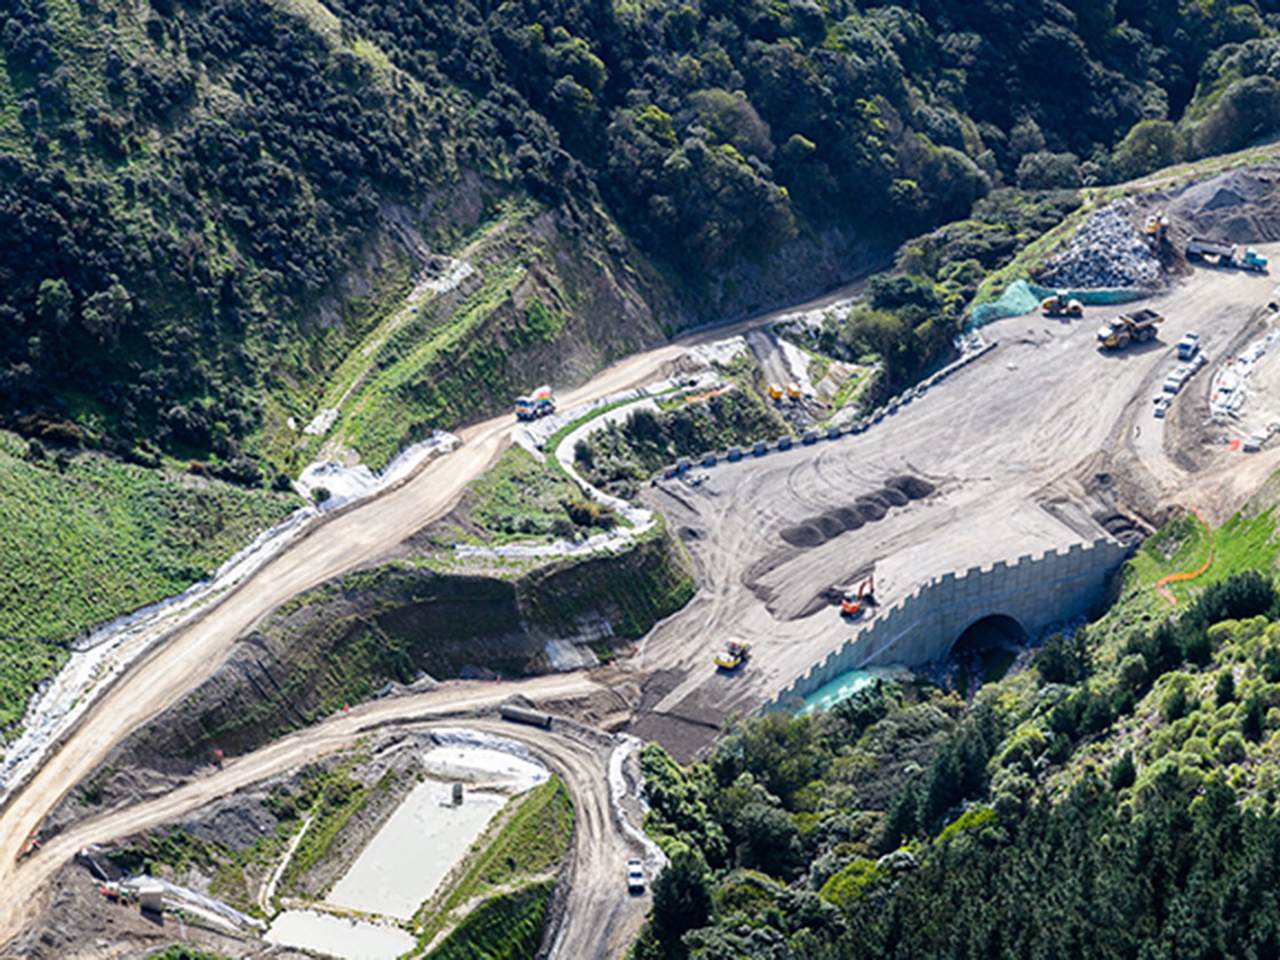 Aerial view of the TechSpan precast concrete arches and Reinforced Earth MSE walls for New Zealand road infrastructure, Transmission Gully Project.